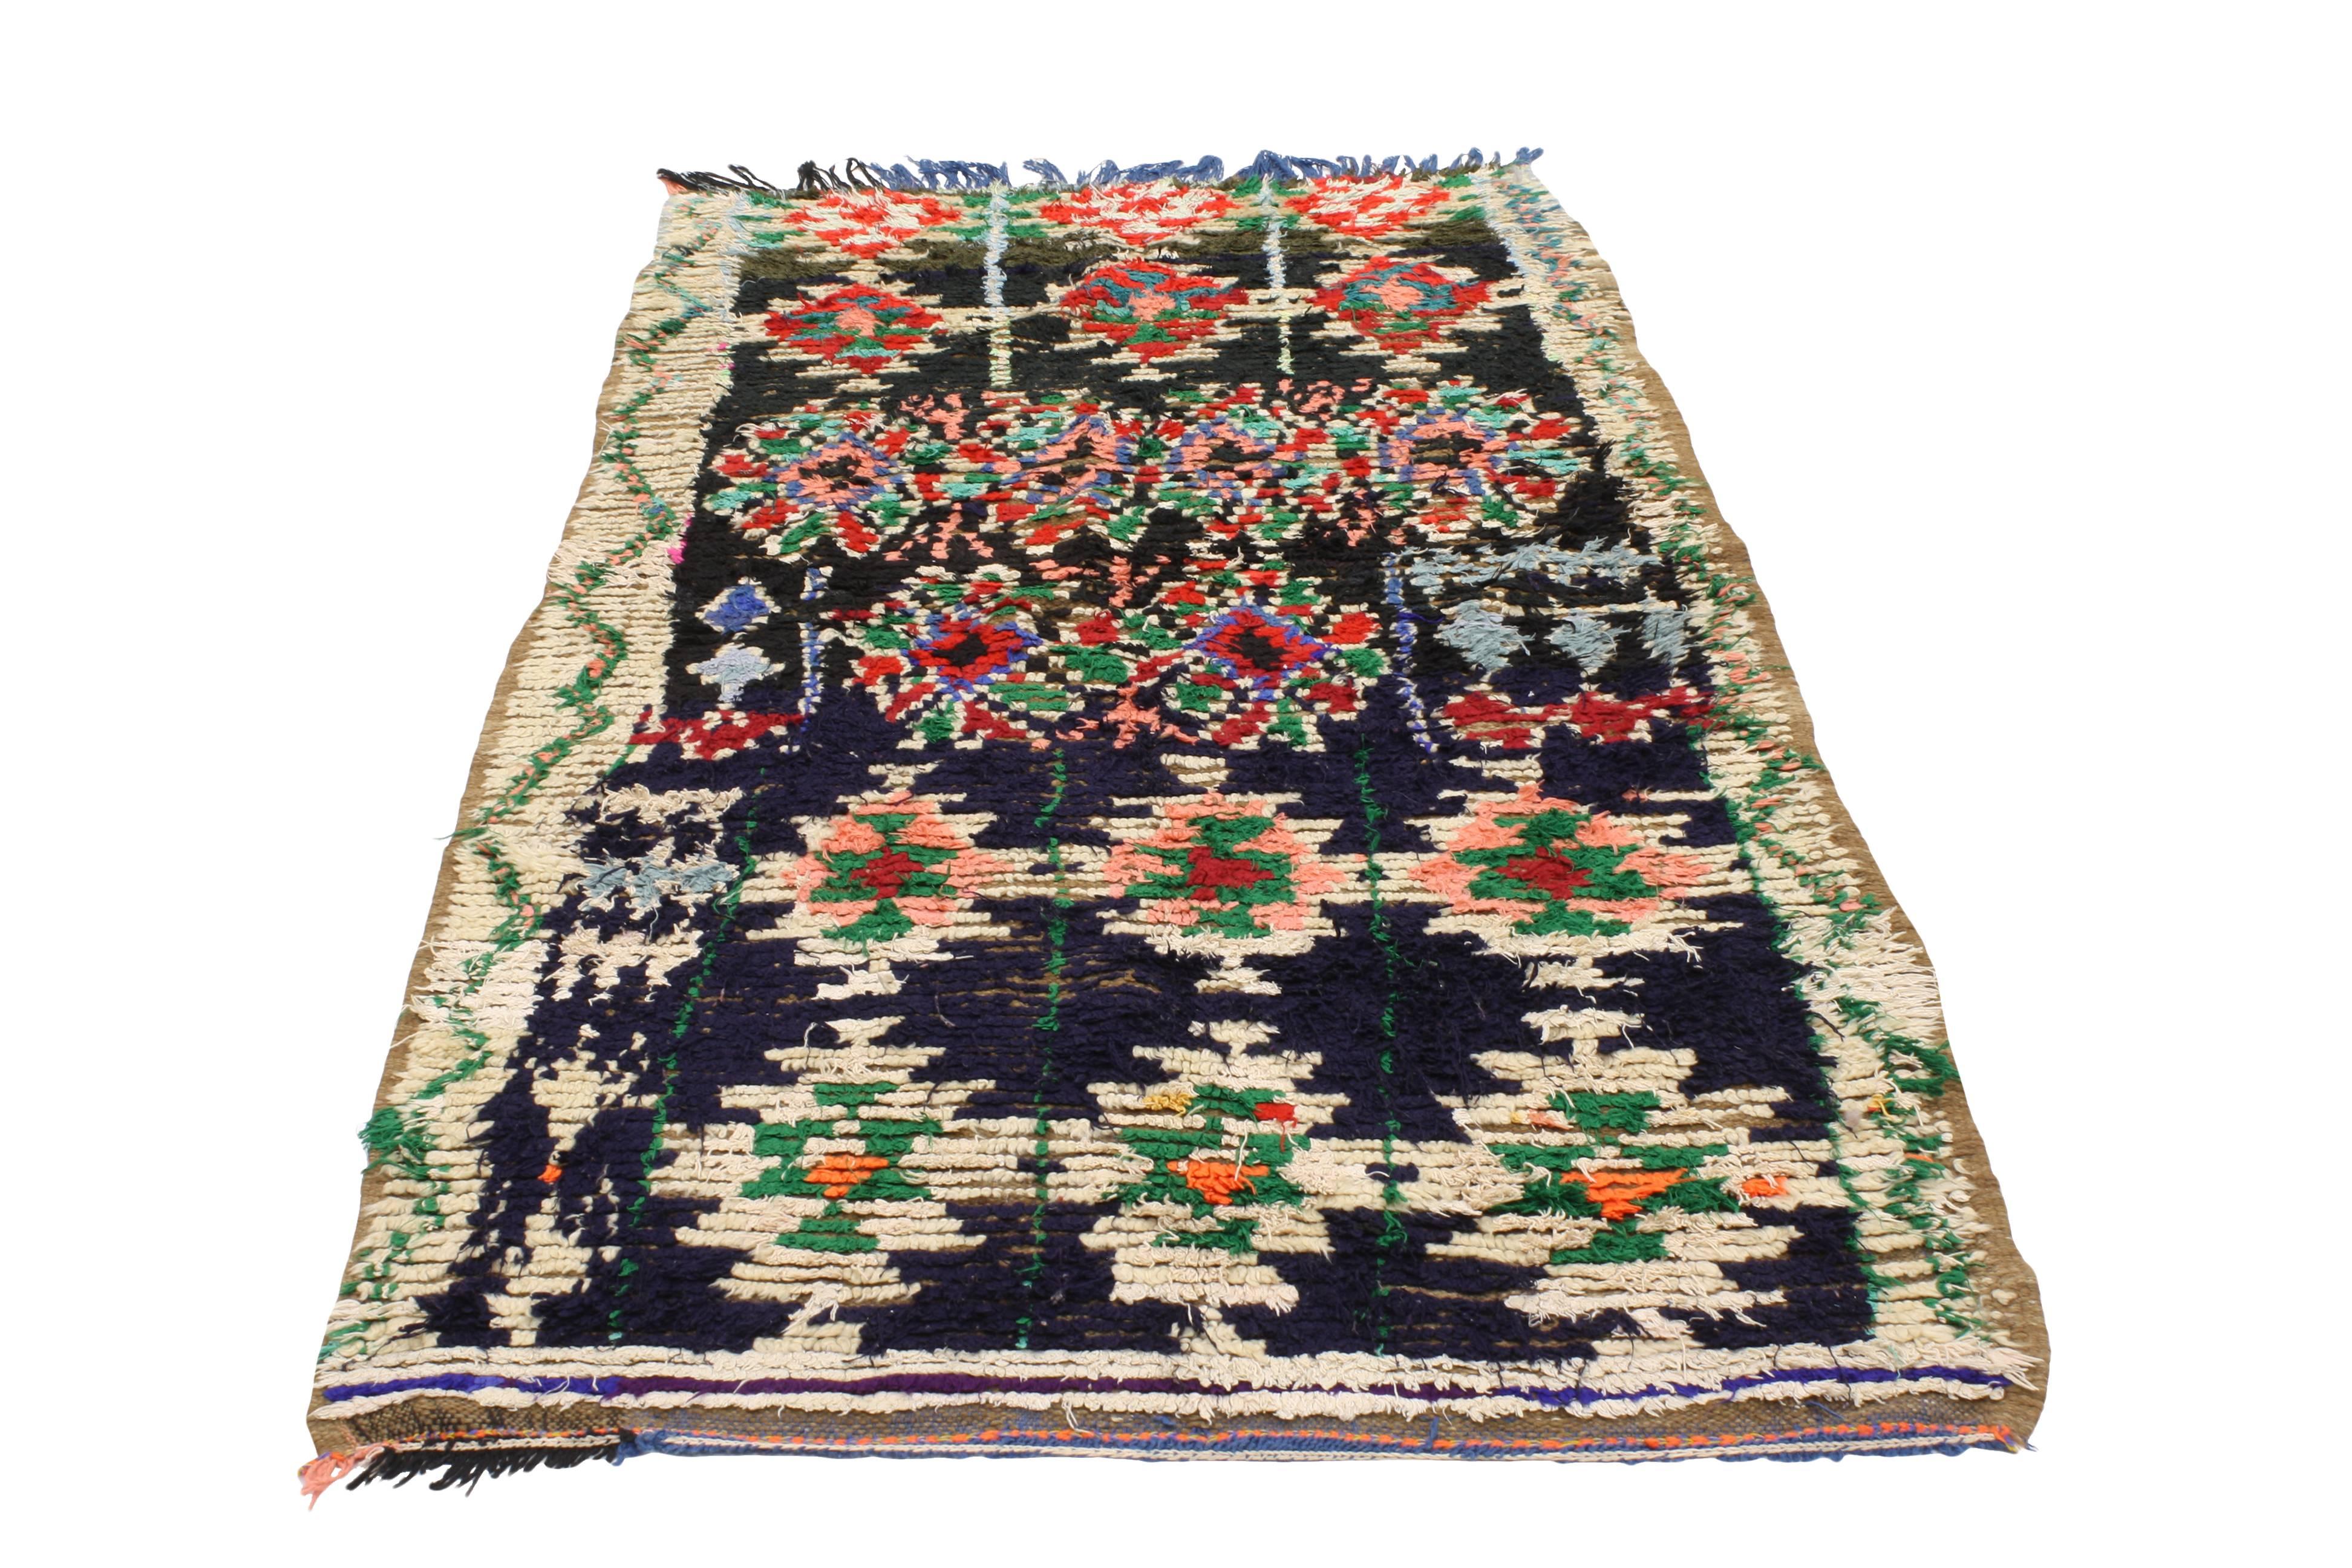 Post-Modern Vintage Berber Moroccan Boucherouite Rug with Tribal Style and Memphis Design